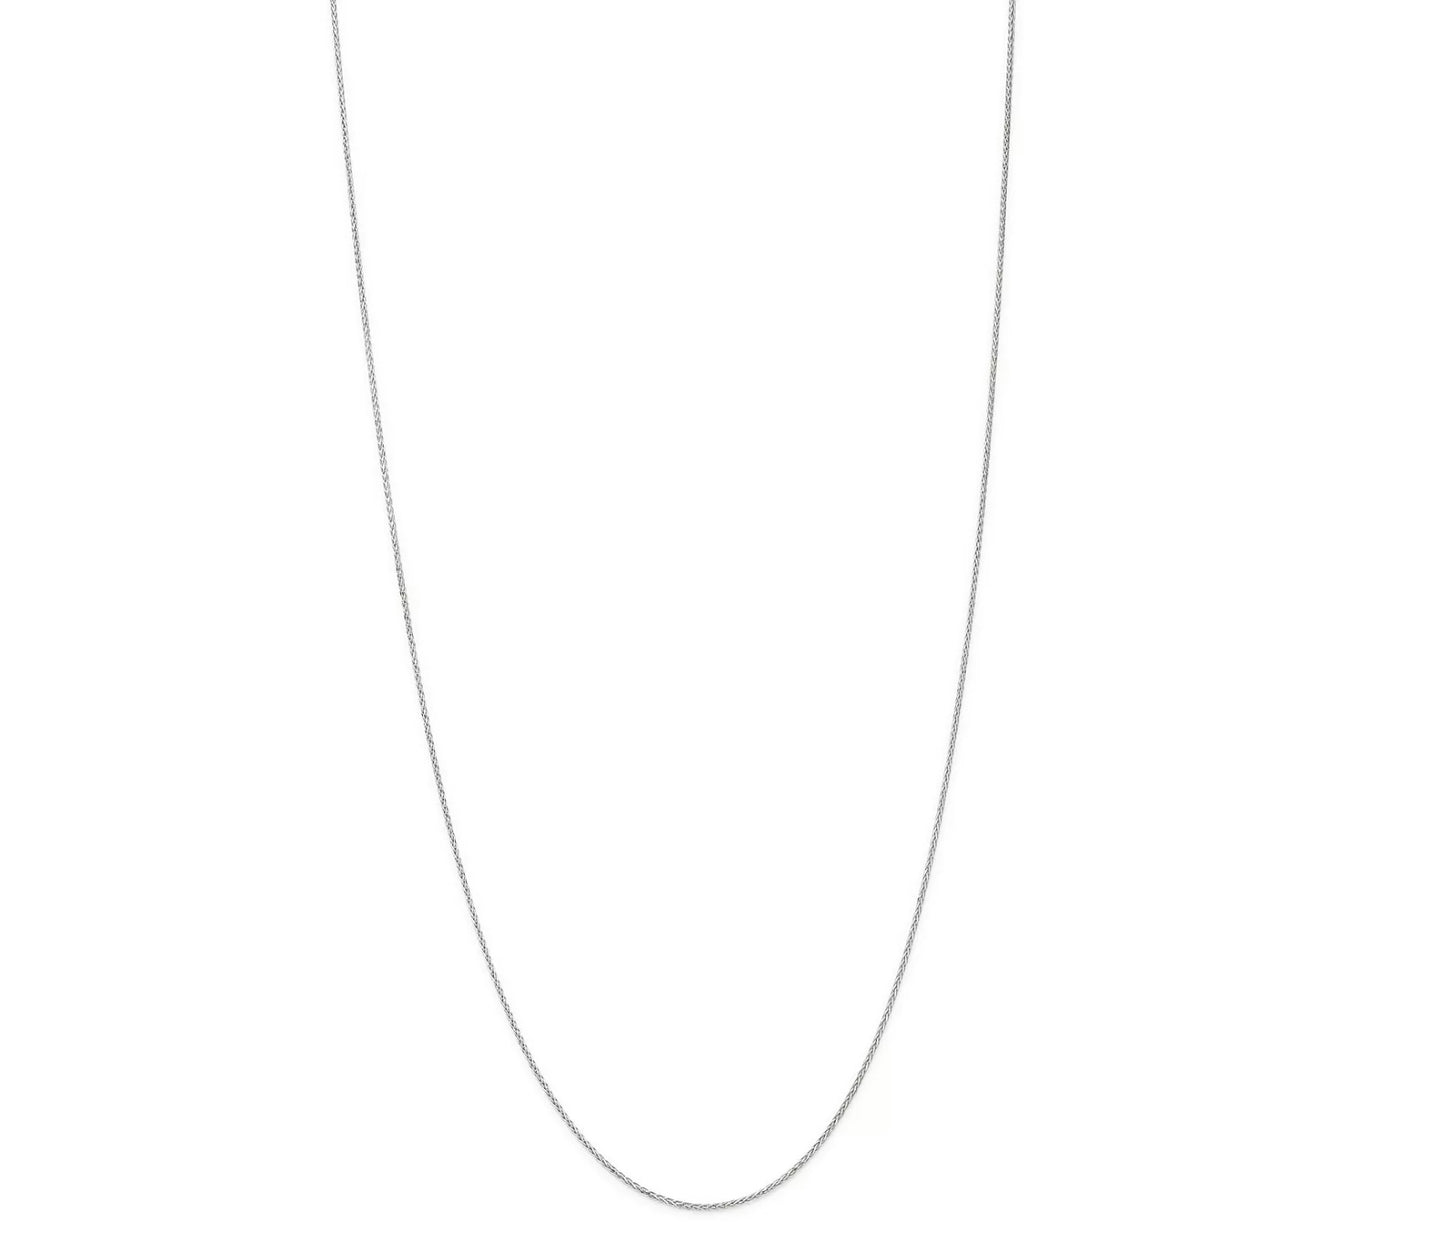 Wheat Link Chain Necklace in 14K Gold or 14k White Gold